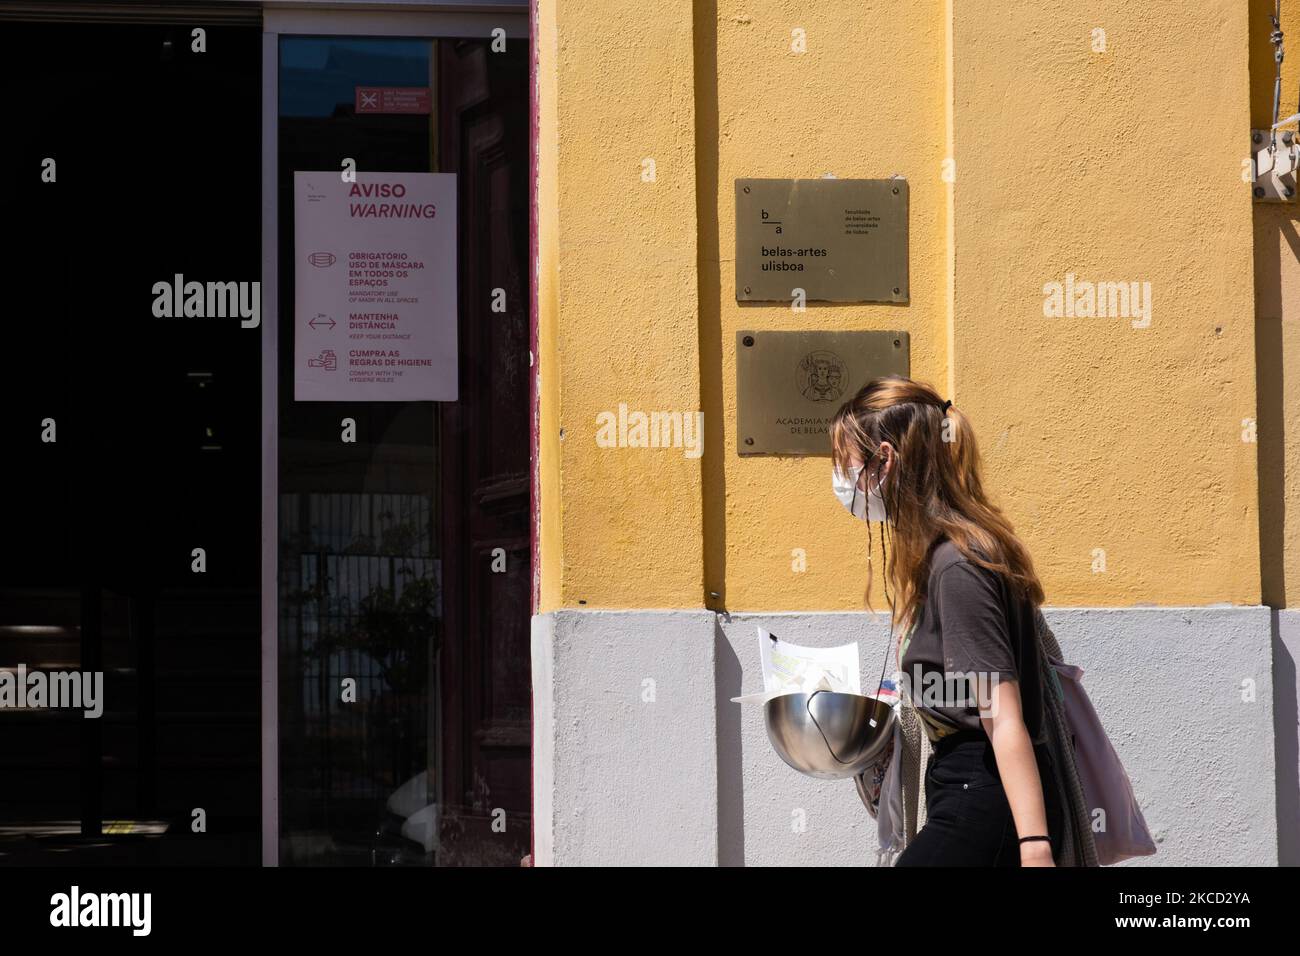 A student arrive at the University of fine arts, on April 19, 2021, in Lisbon, Portugal. The Portuguese government has established a four-step plan to ease COVID-19 restrictions, with the third stage starting on April 19th with the reopening all shops and shopping centres, Cinemas, auditoriums, theaters, Secondary and higher education resumes with face to face classes, Outdoor events with reduced capacity (Photo by Nuno Cruz/NurPhoto) Stock Photo